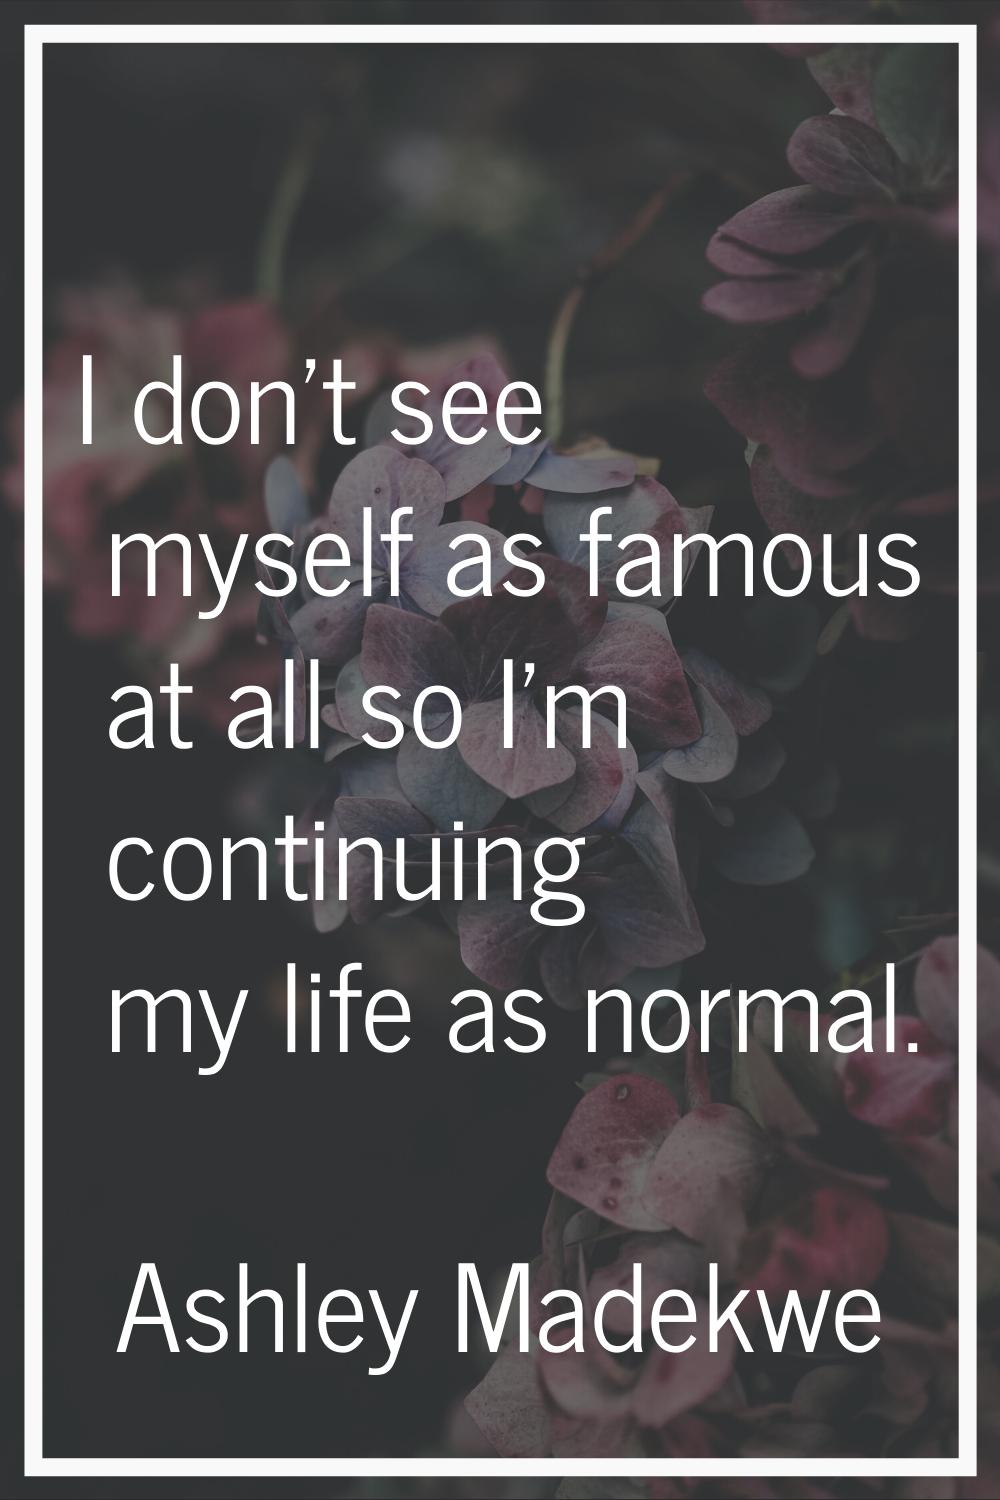 I don't see myself as famous at all so I'm continuing my life as normal.